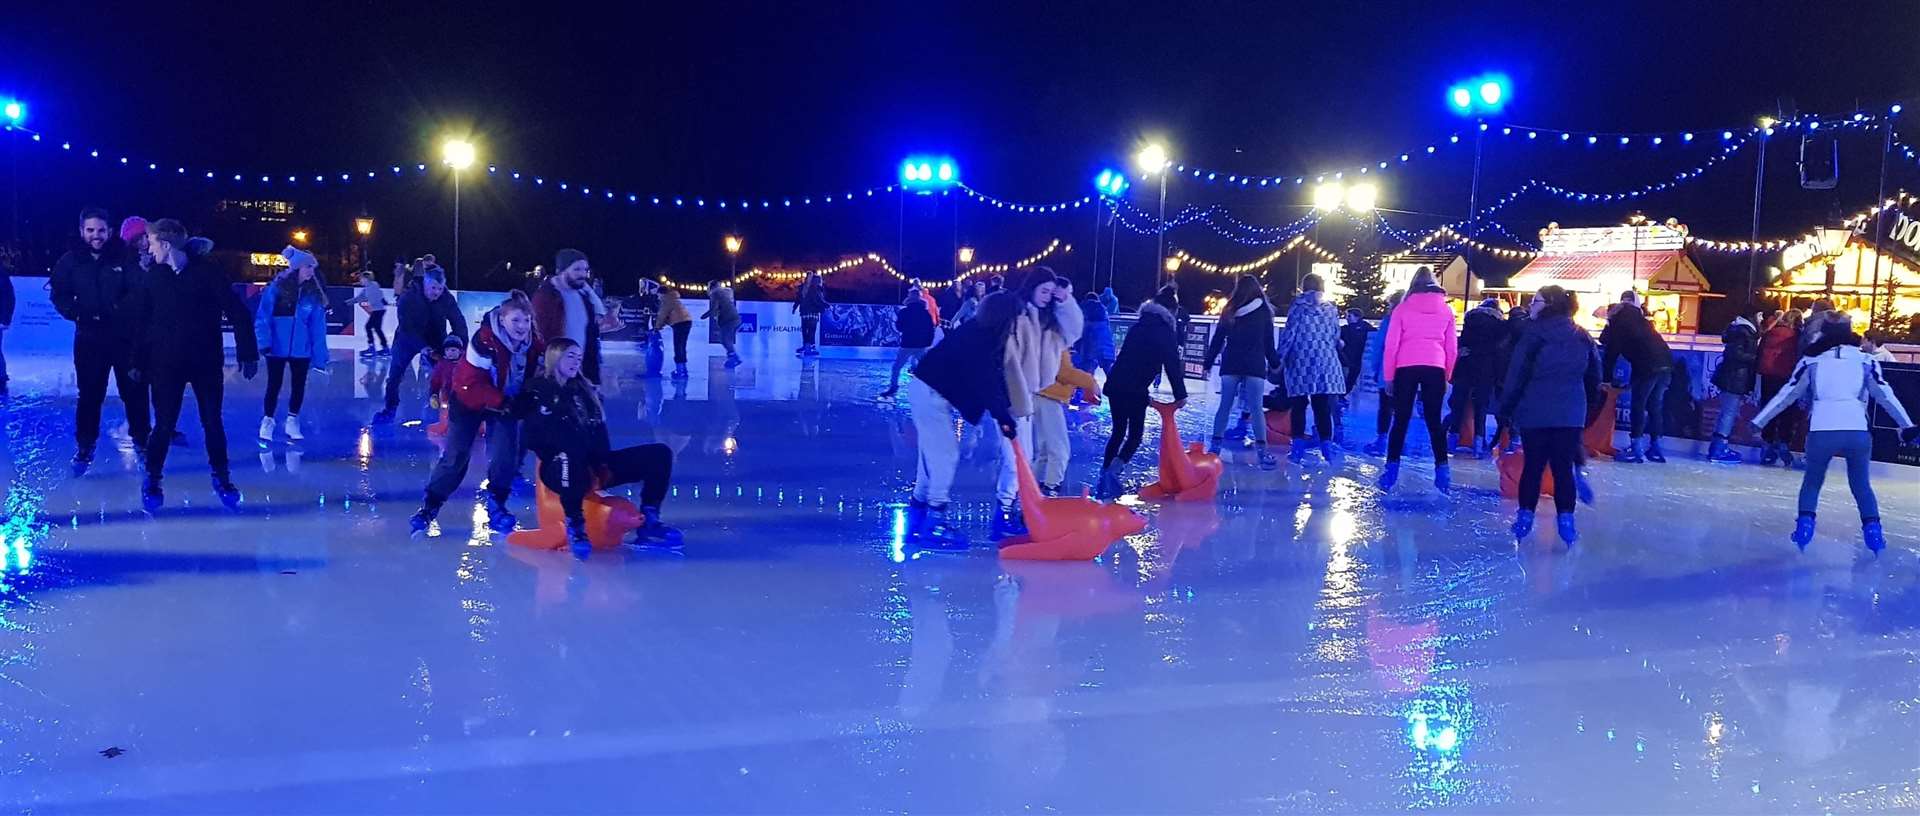 People will be able to skate in Tunbridge Wells during the Christmas season